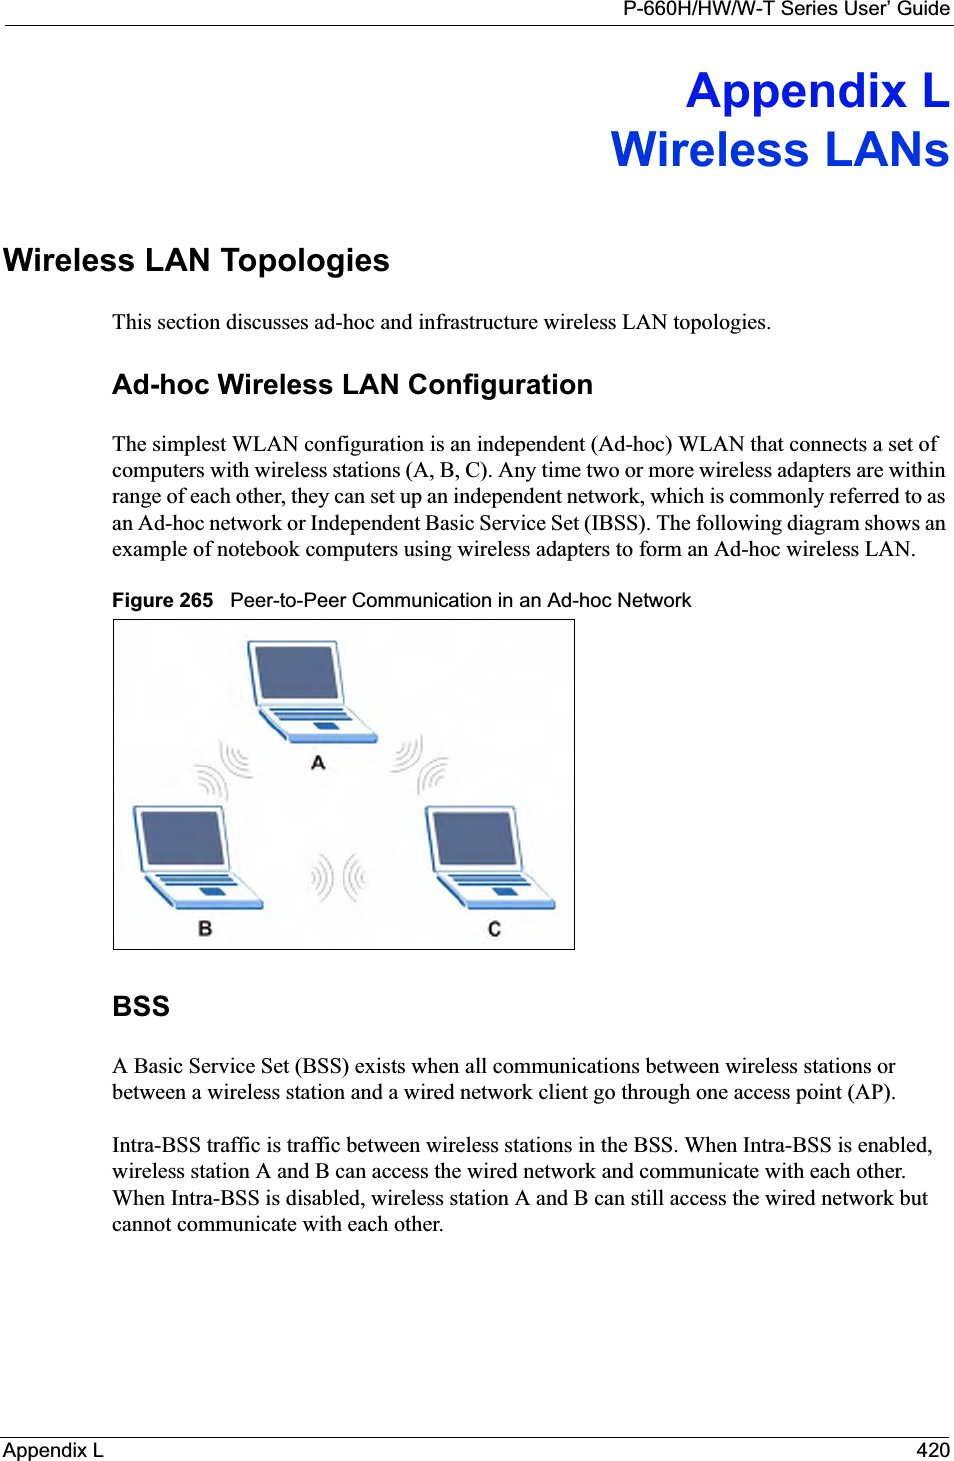 P-660H/HW/W-T Series User’ GuideAppendix L 420Appendix LWireless LANsWireless LAN TopologiesThis section discusses ad-hoc and infrastructure wireless LAN topologies.Ad-hoc Wireless LAN ConfigurationThe simplest WLAN configuration is an independent (Ad-hoc) WLAN that connects a set of computers with wireless stations (A, B, C). Any time two or more wireless adapters are within range of each other, they can set up an independent network, which is commonly referred to as an Ad-hoc network or Independent Basic Service Set (IBSS). The following diagram shows an example of notebook computers using wireless adapters to form an Ad-hoc wireless LAN. Figure 265   Peer-to-Peer Communication in an Ad-hoc NetworkBSSA Basic Service Set (BSS) exists when all communications between wireless stations or between a wireless station and a wired network client go through one access point (AP). Intra-BSS traffic is traffic between wireless stations in the BSS. When Intra-BSS is enabled, wireless station A and B can access the wired network and communicate with each other. When Intra-BSS is disabled, wireless station A and B can still access the wired network but cannot communicate with each other.